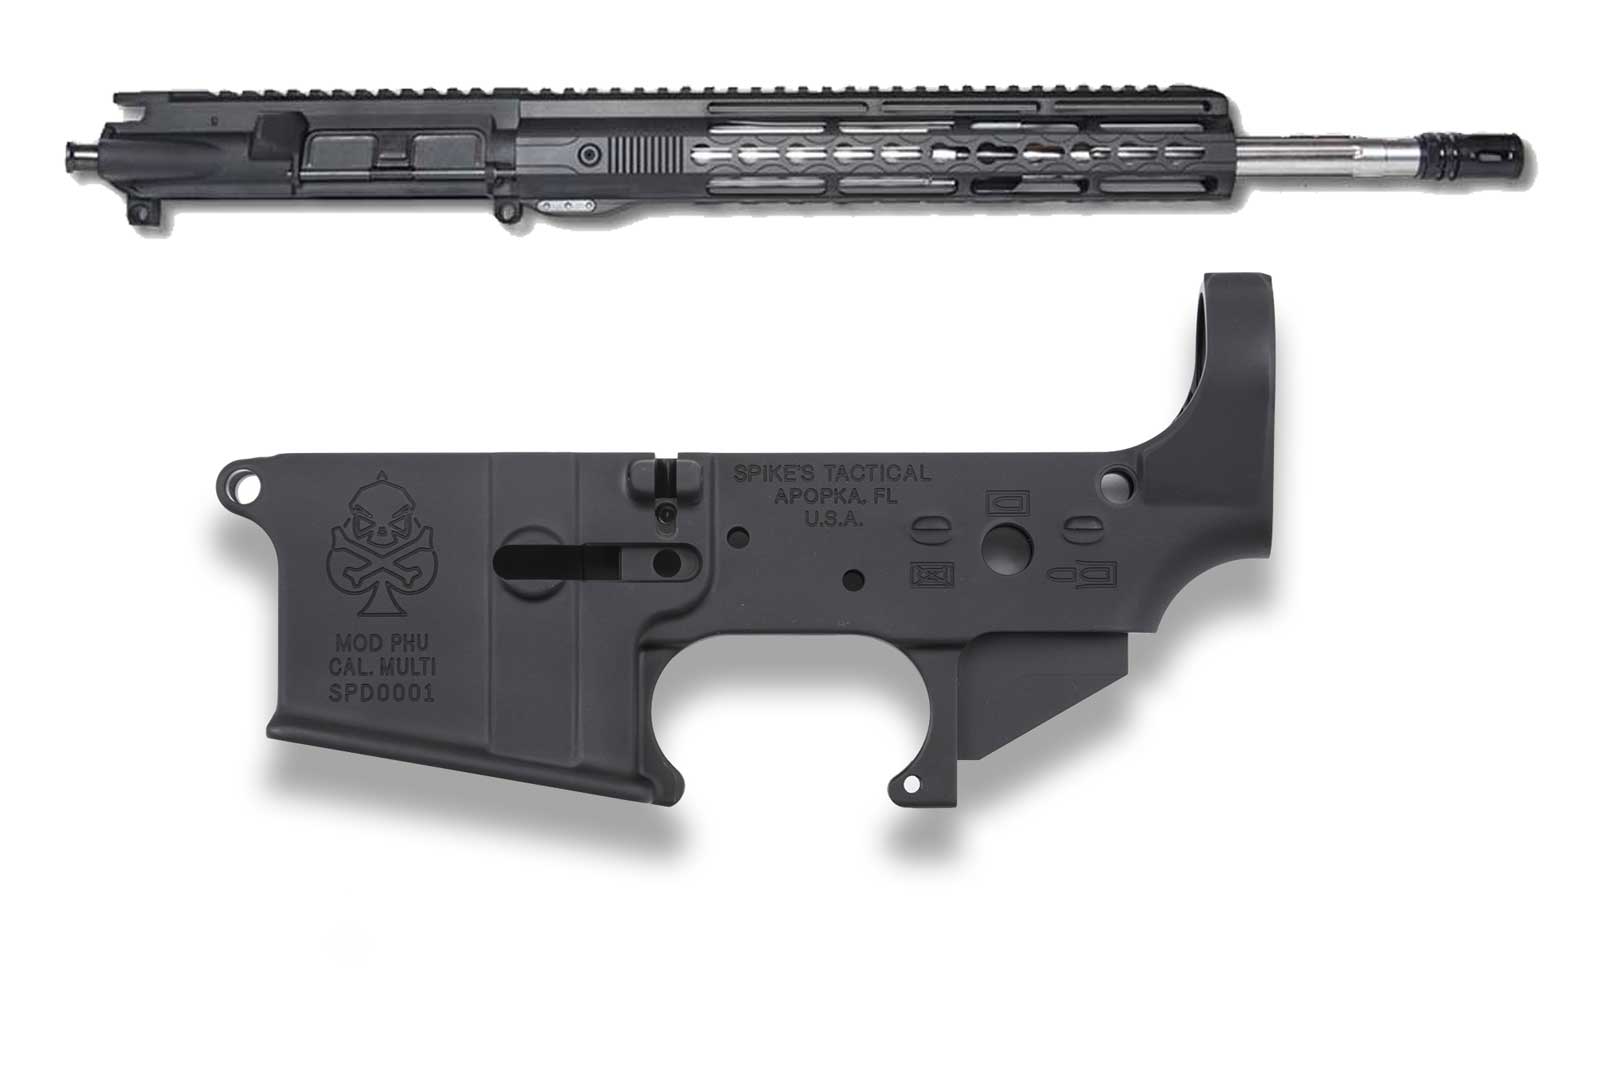 ar15-upper-assembly-with-spikes-tactical-lower-16-223-wylde-straight-flute-pipe-hitters-union-spade-160359